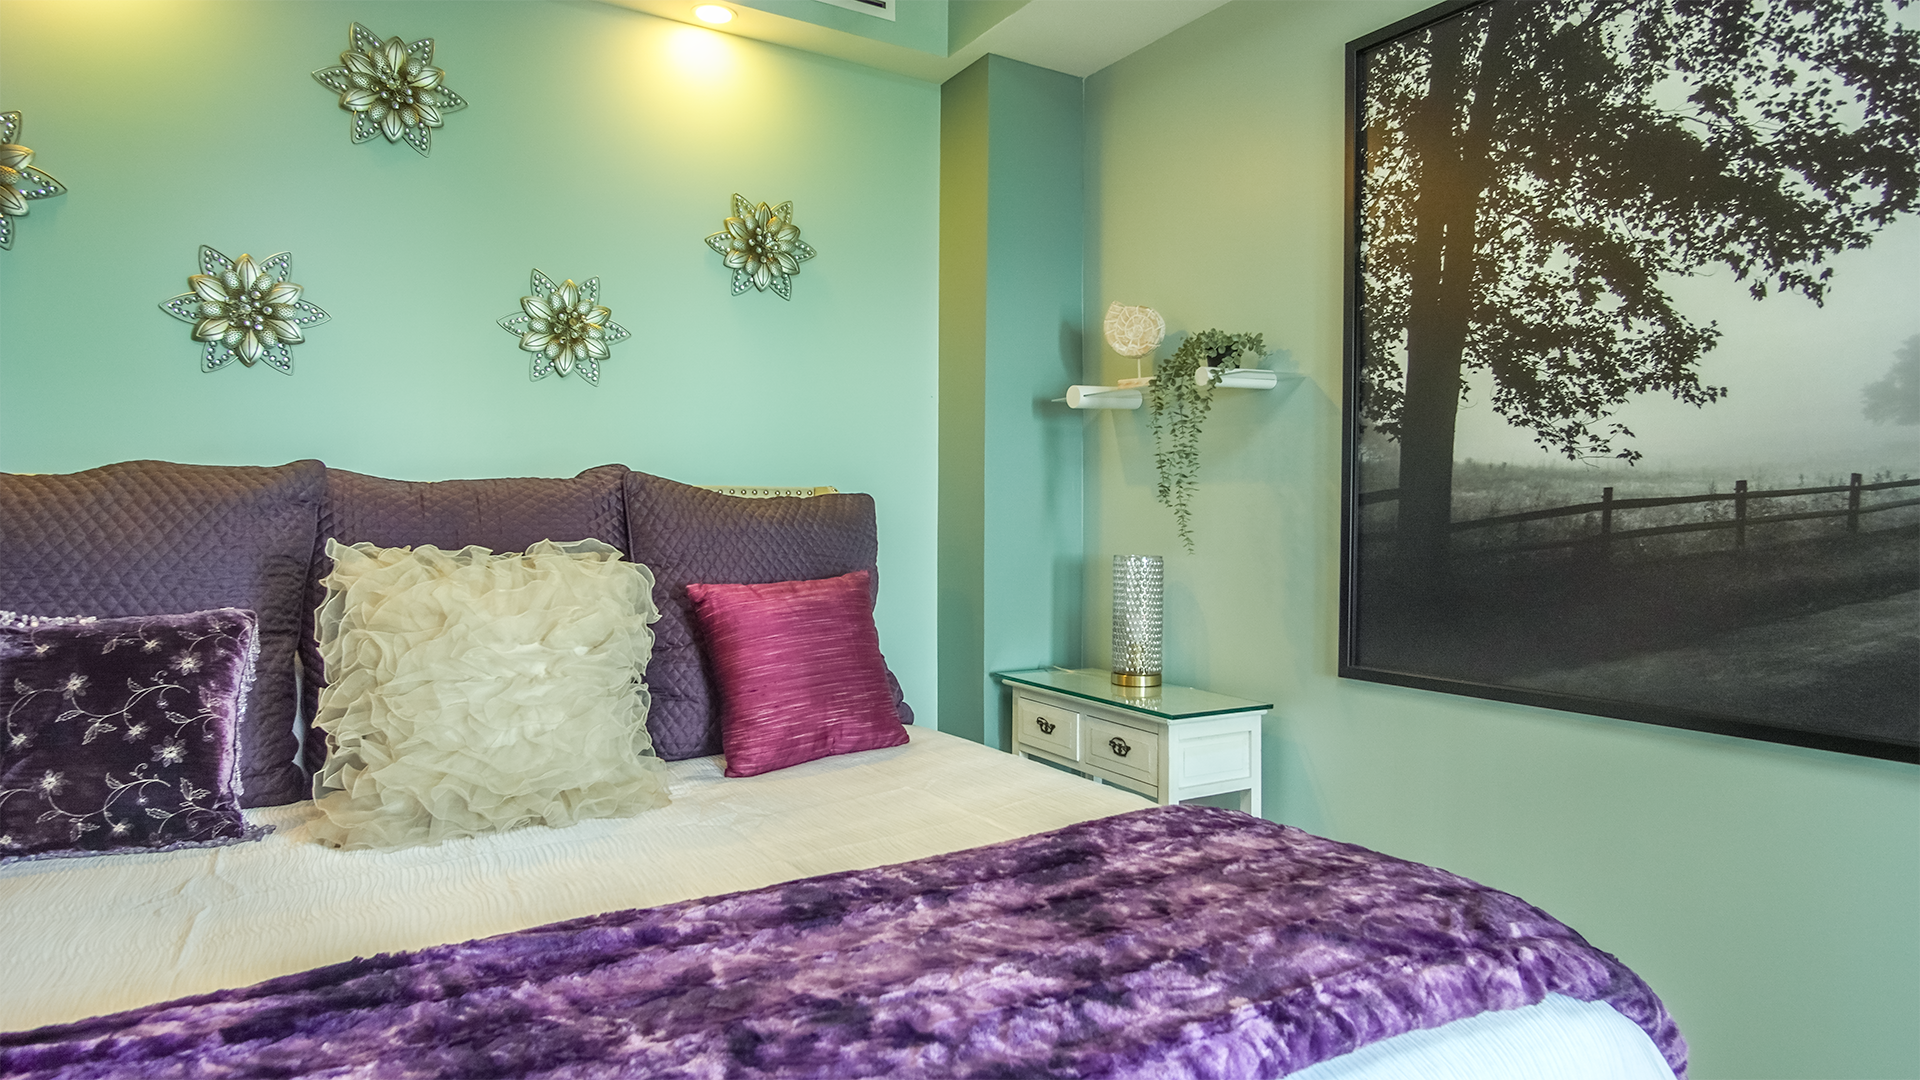 Vibrant colors in the second bedroom make this a luxury place to escape.